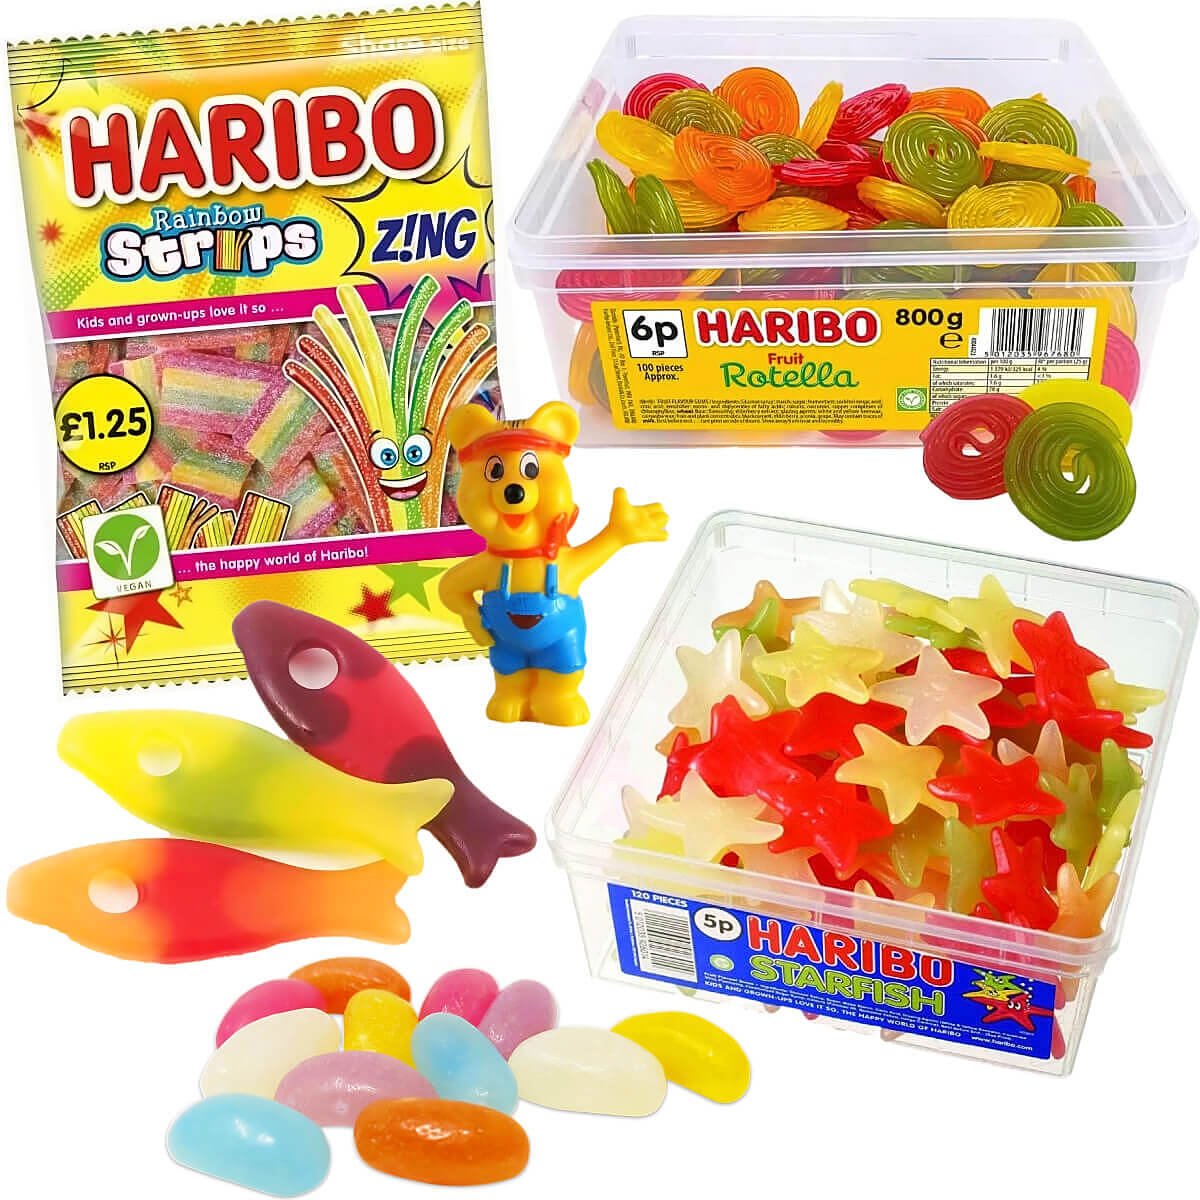 Which Haribo Sweets Are Vegetarian?